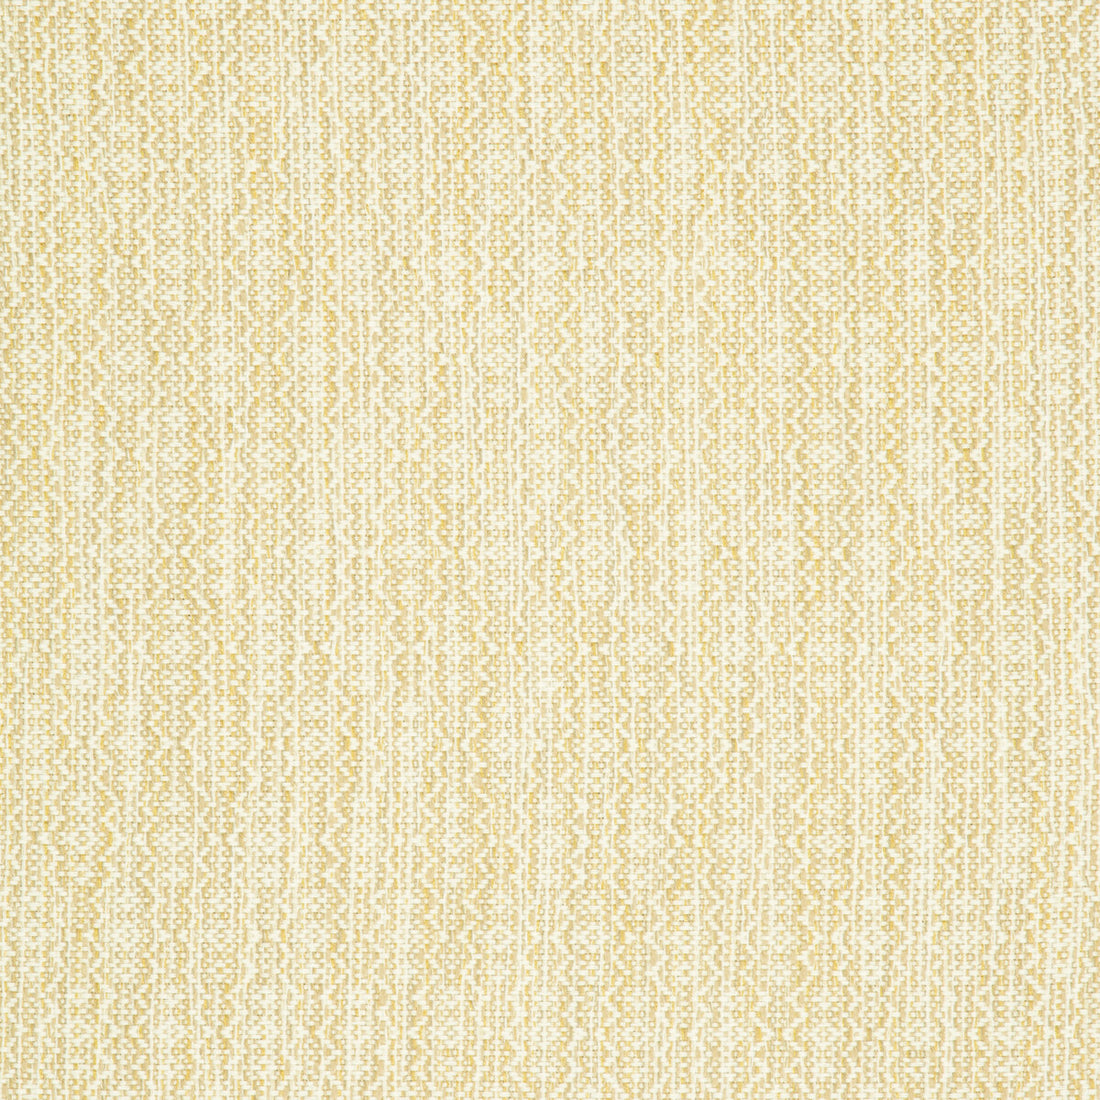 Kravet Smart fabric in 34625-16 color - pattern 34625.16.0 - by Kravet Smart in the Performance Crypton Home collection